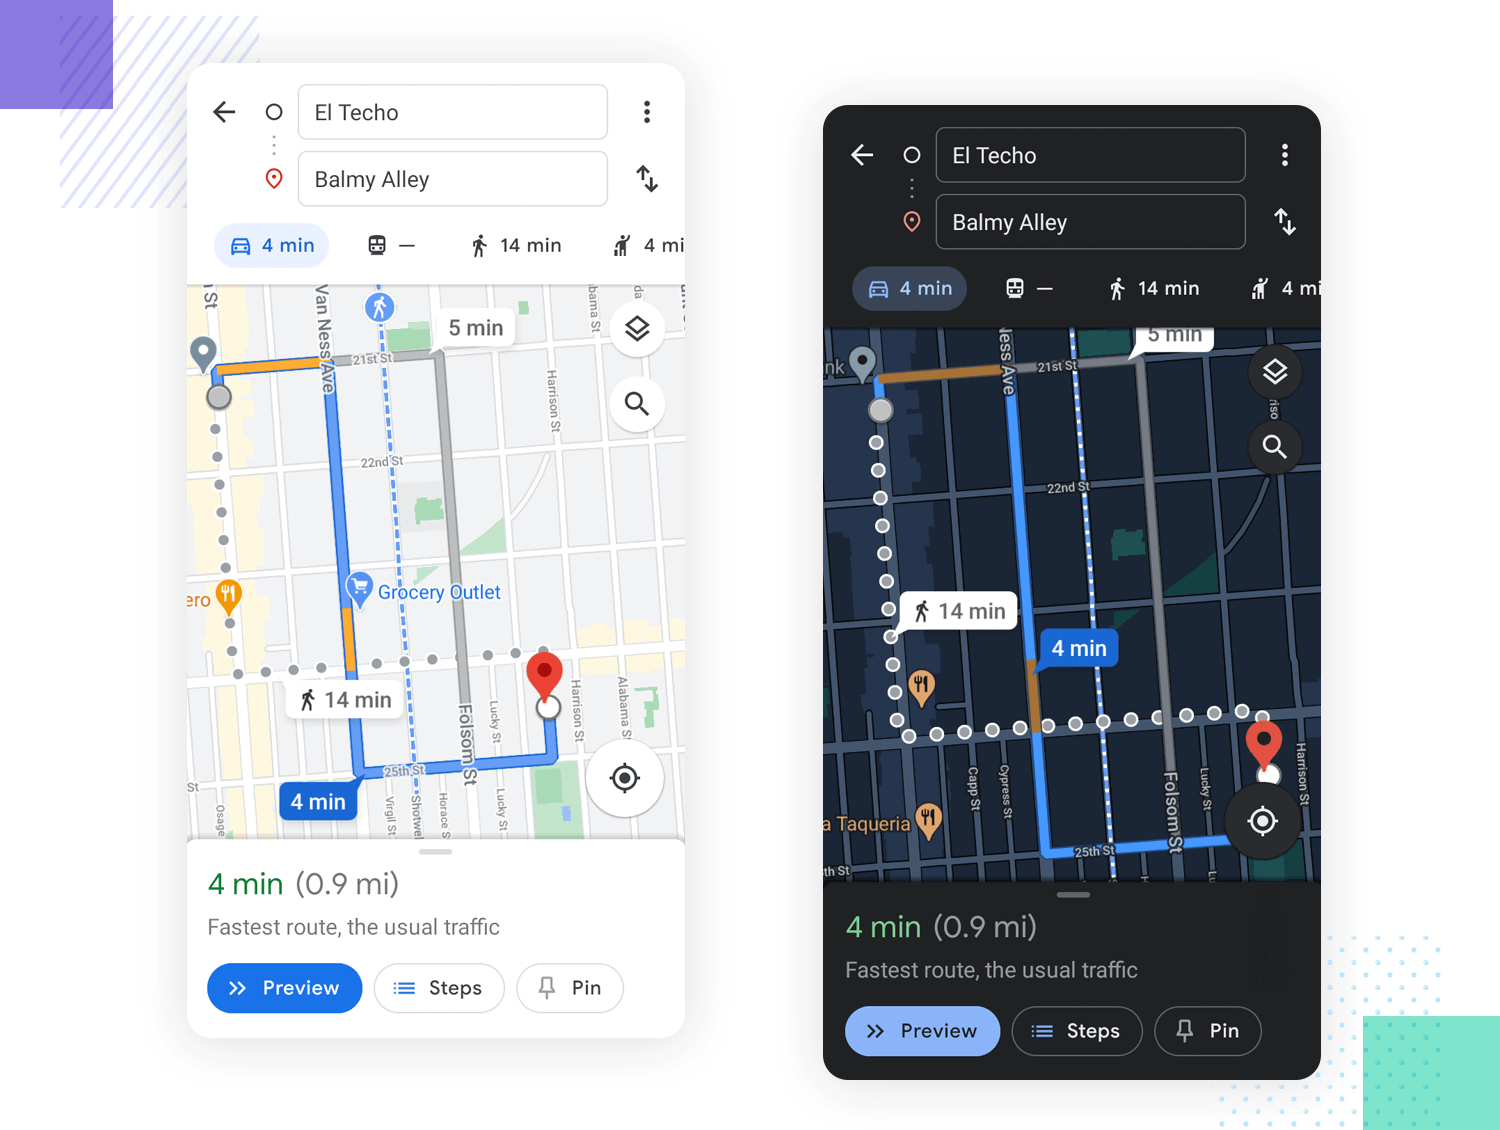 exccample of mobil,e app ux design for users that are moving around